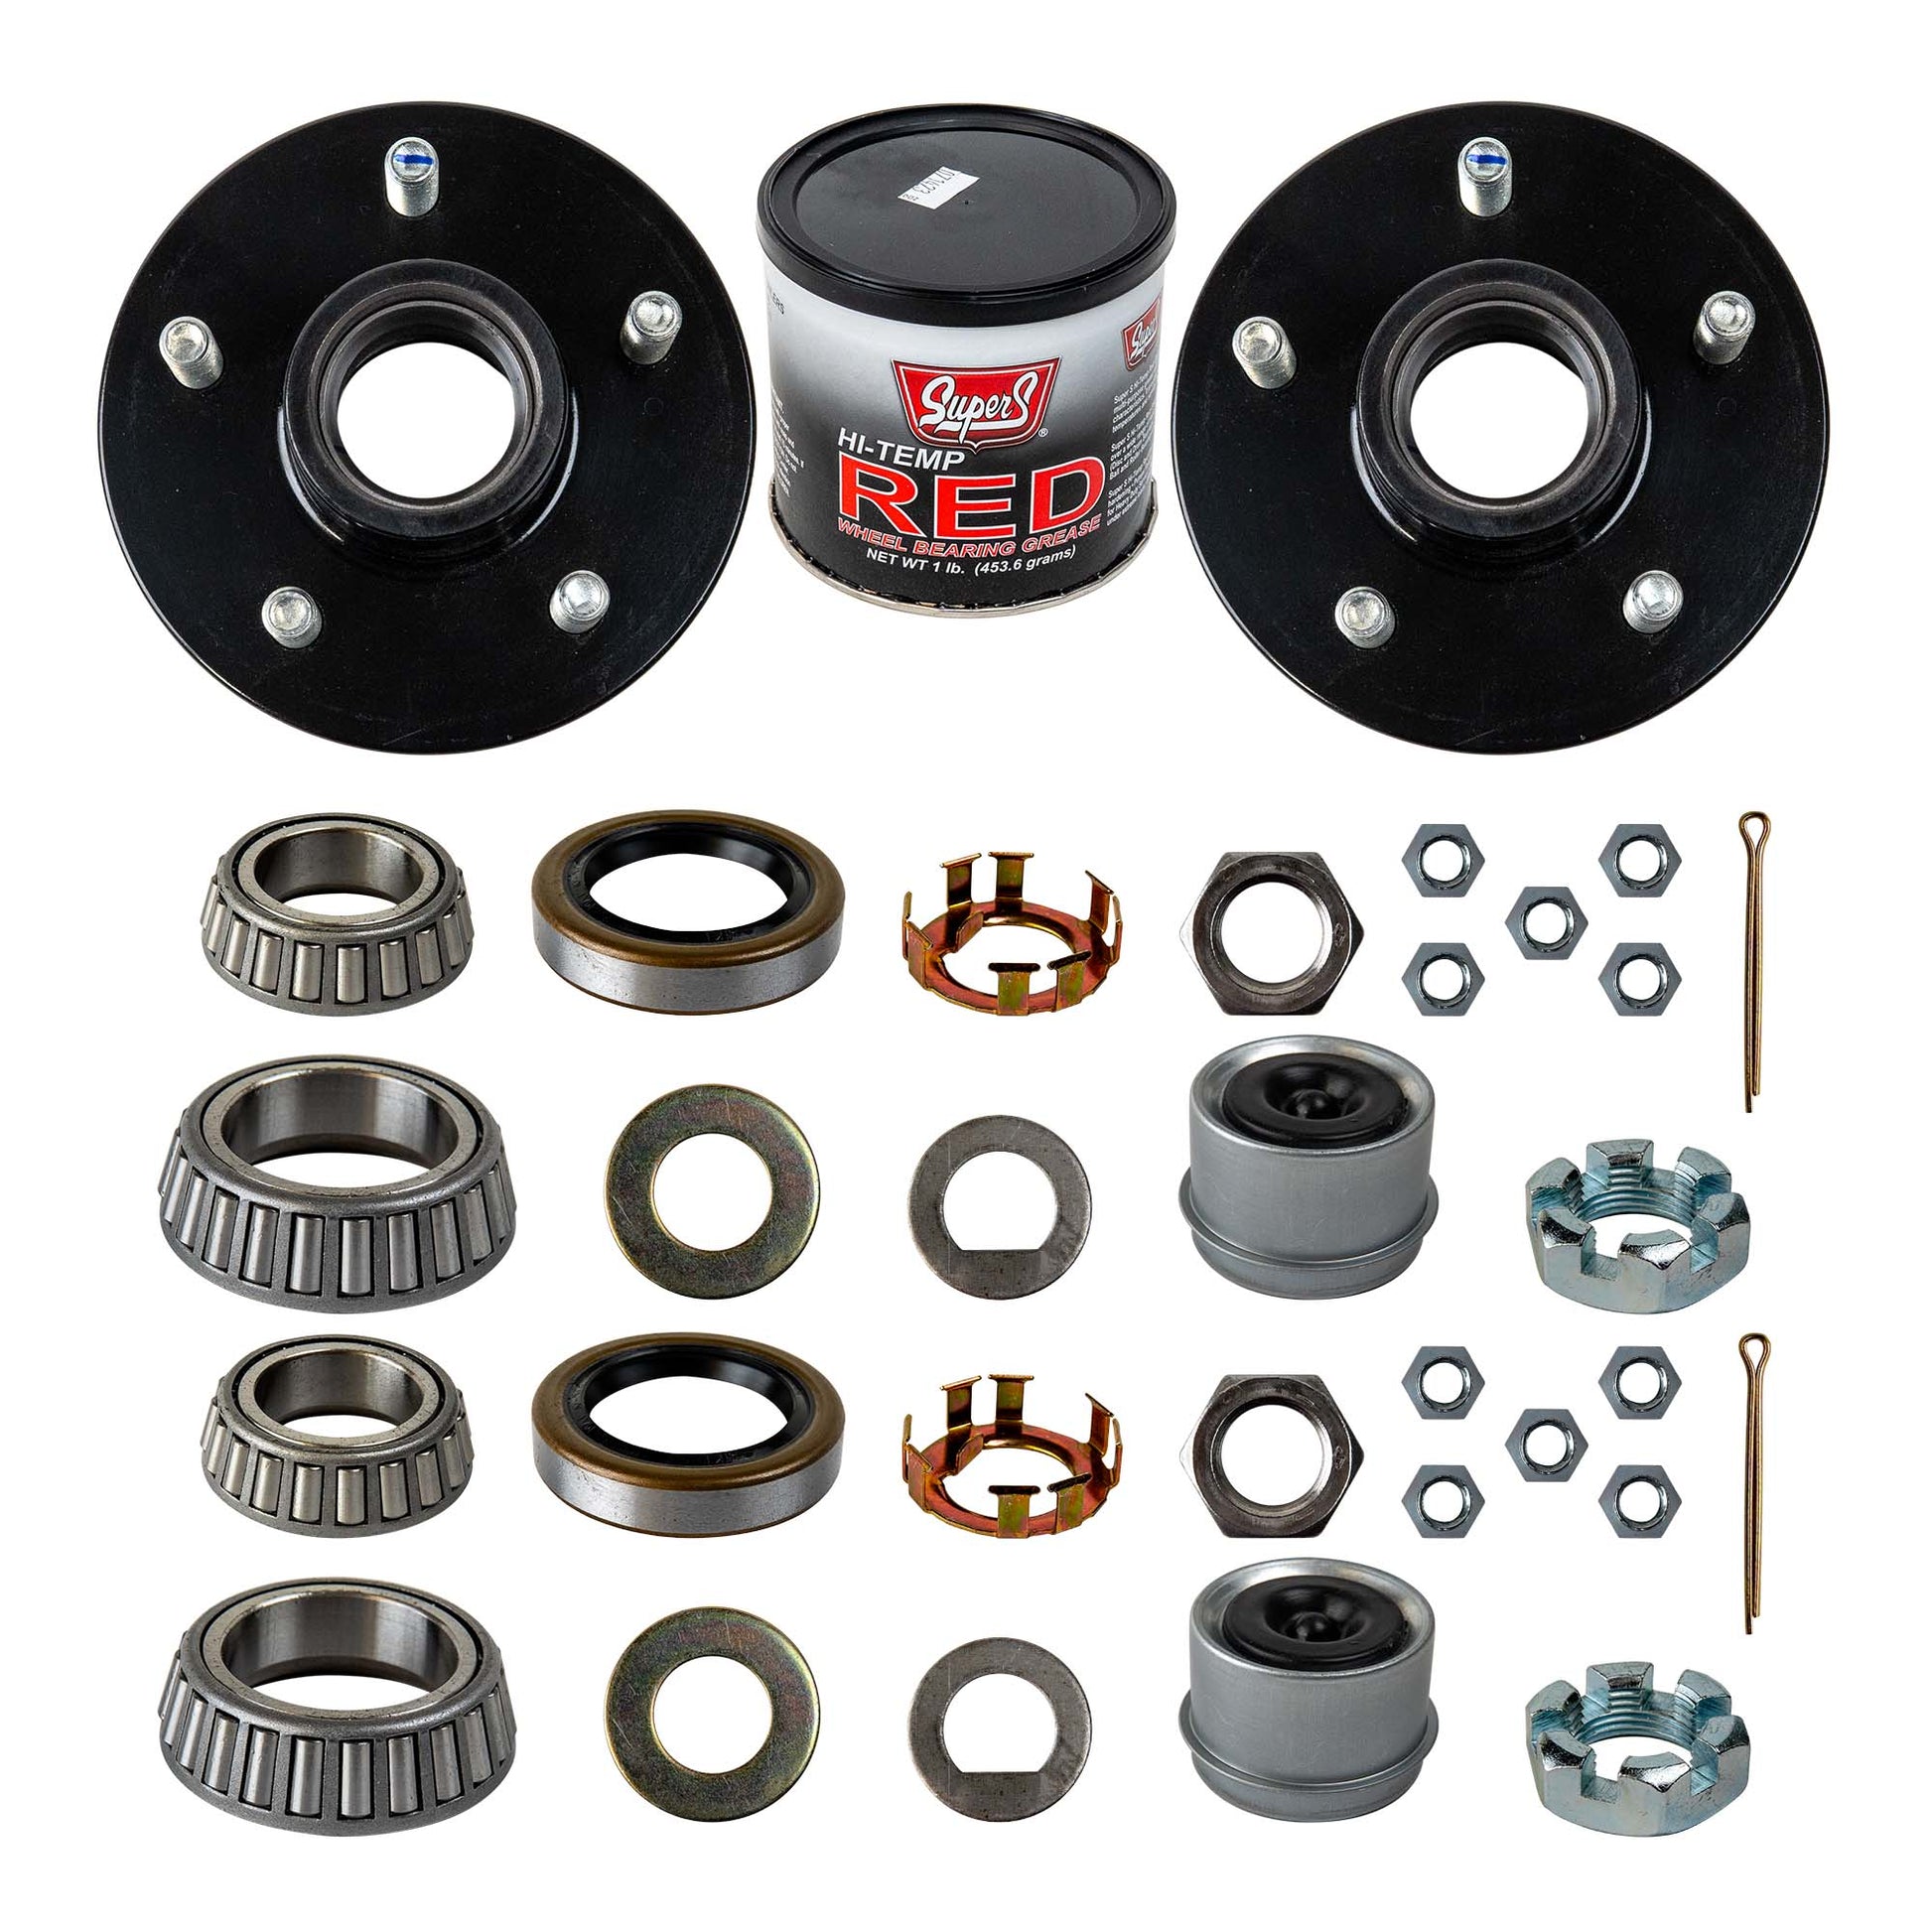 3.5k Trailer Axle Hub - 5 Lug - The Trailer Parts Outlet